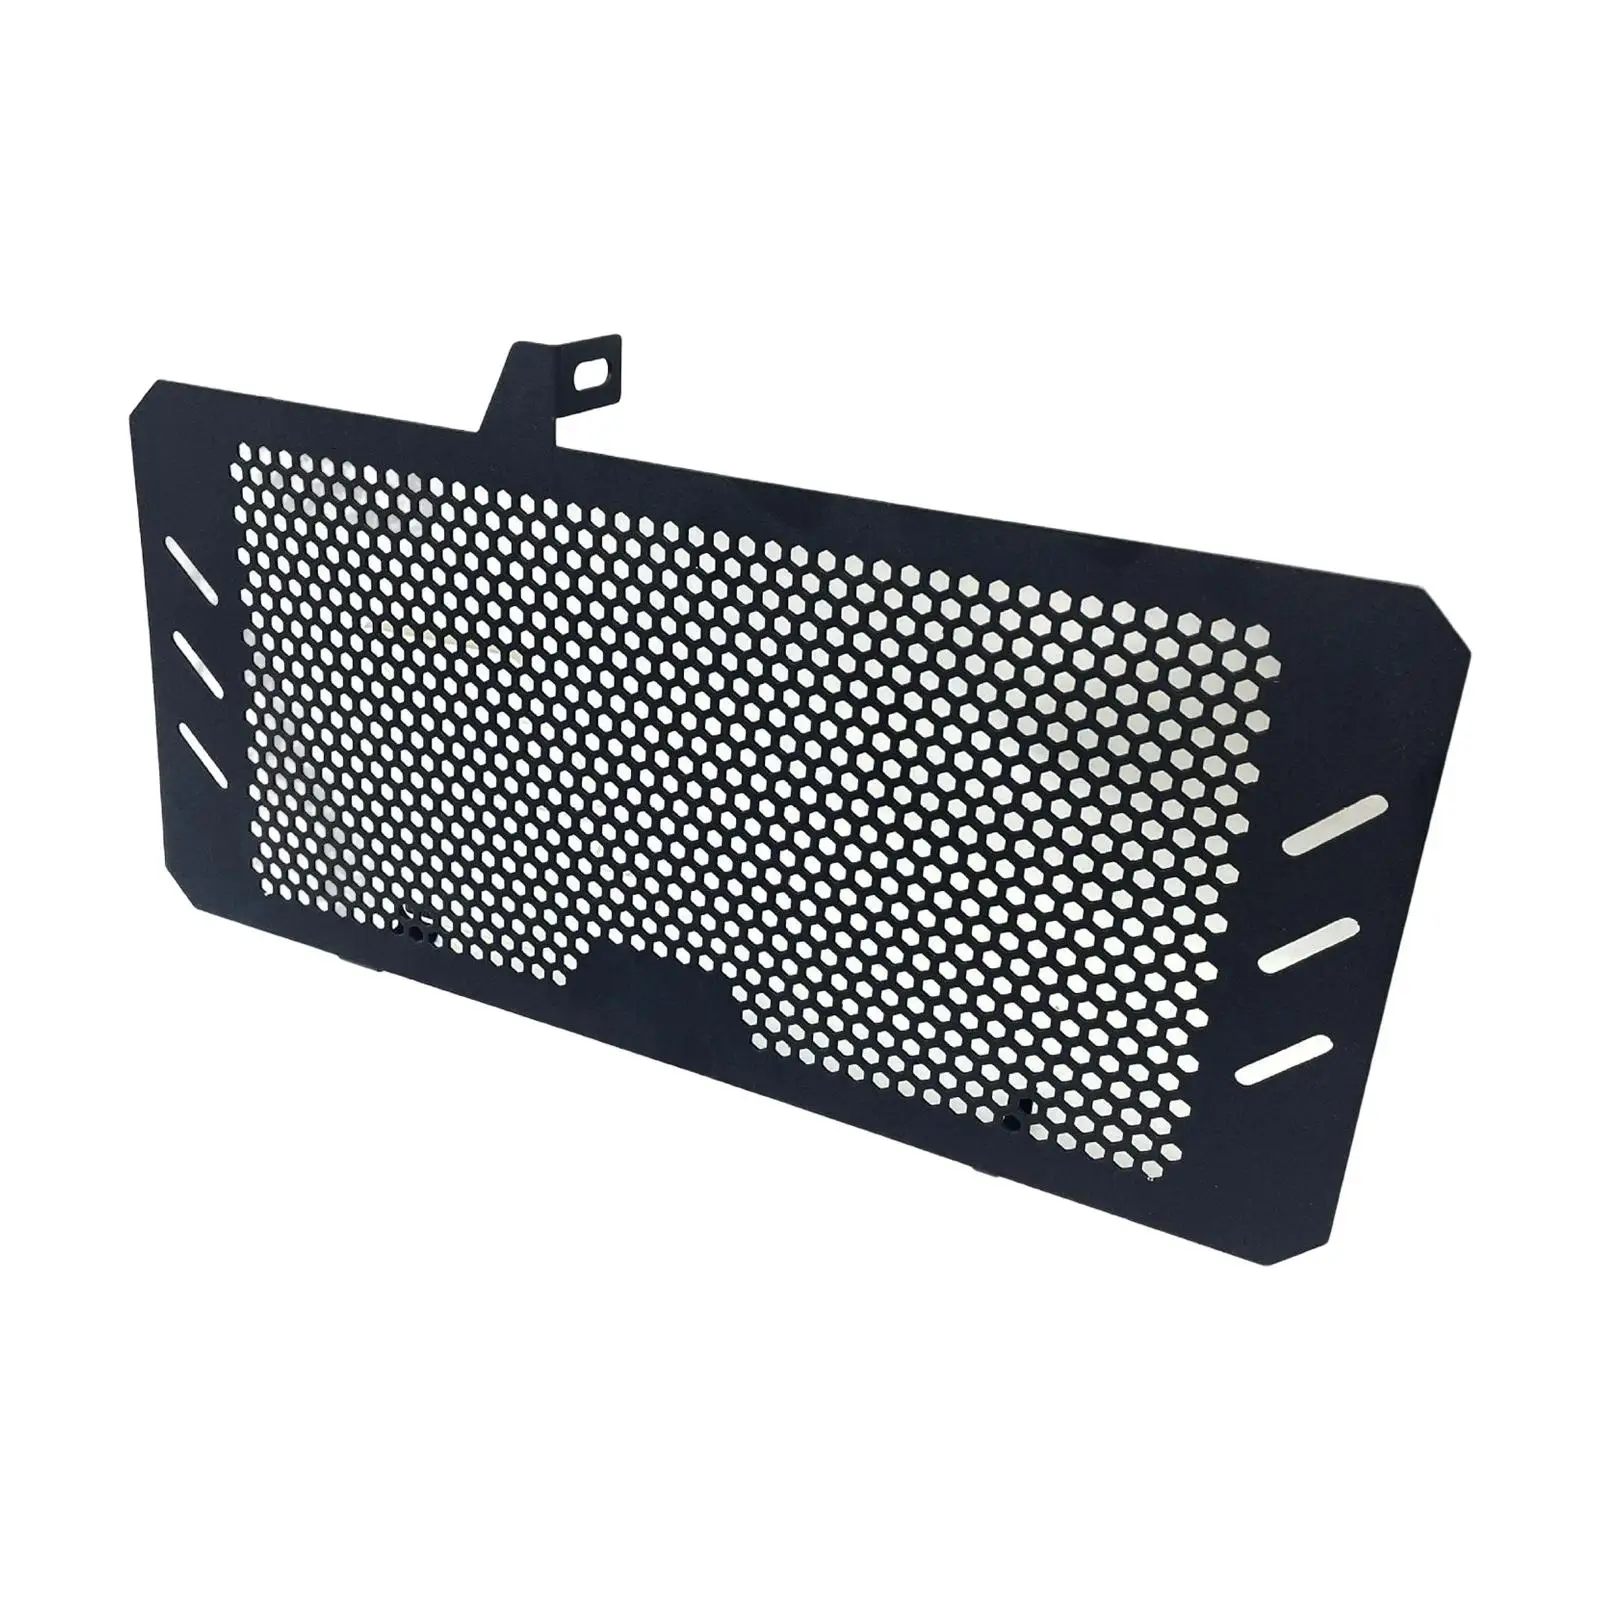 Motorbike Motorcycle Grille Guard Protector Cover, Protective Grill for NC750 S / X Aluminum Alloy.